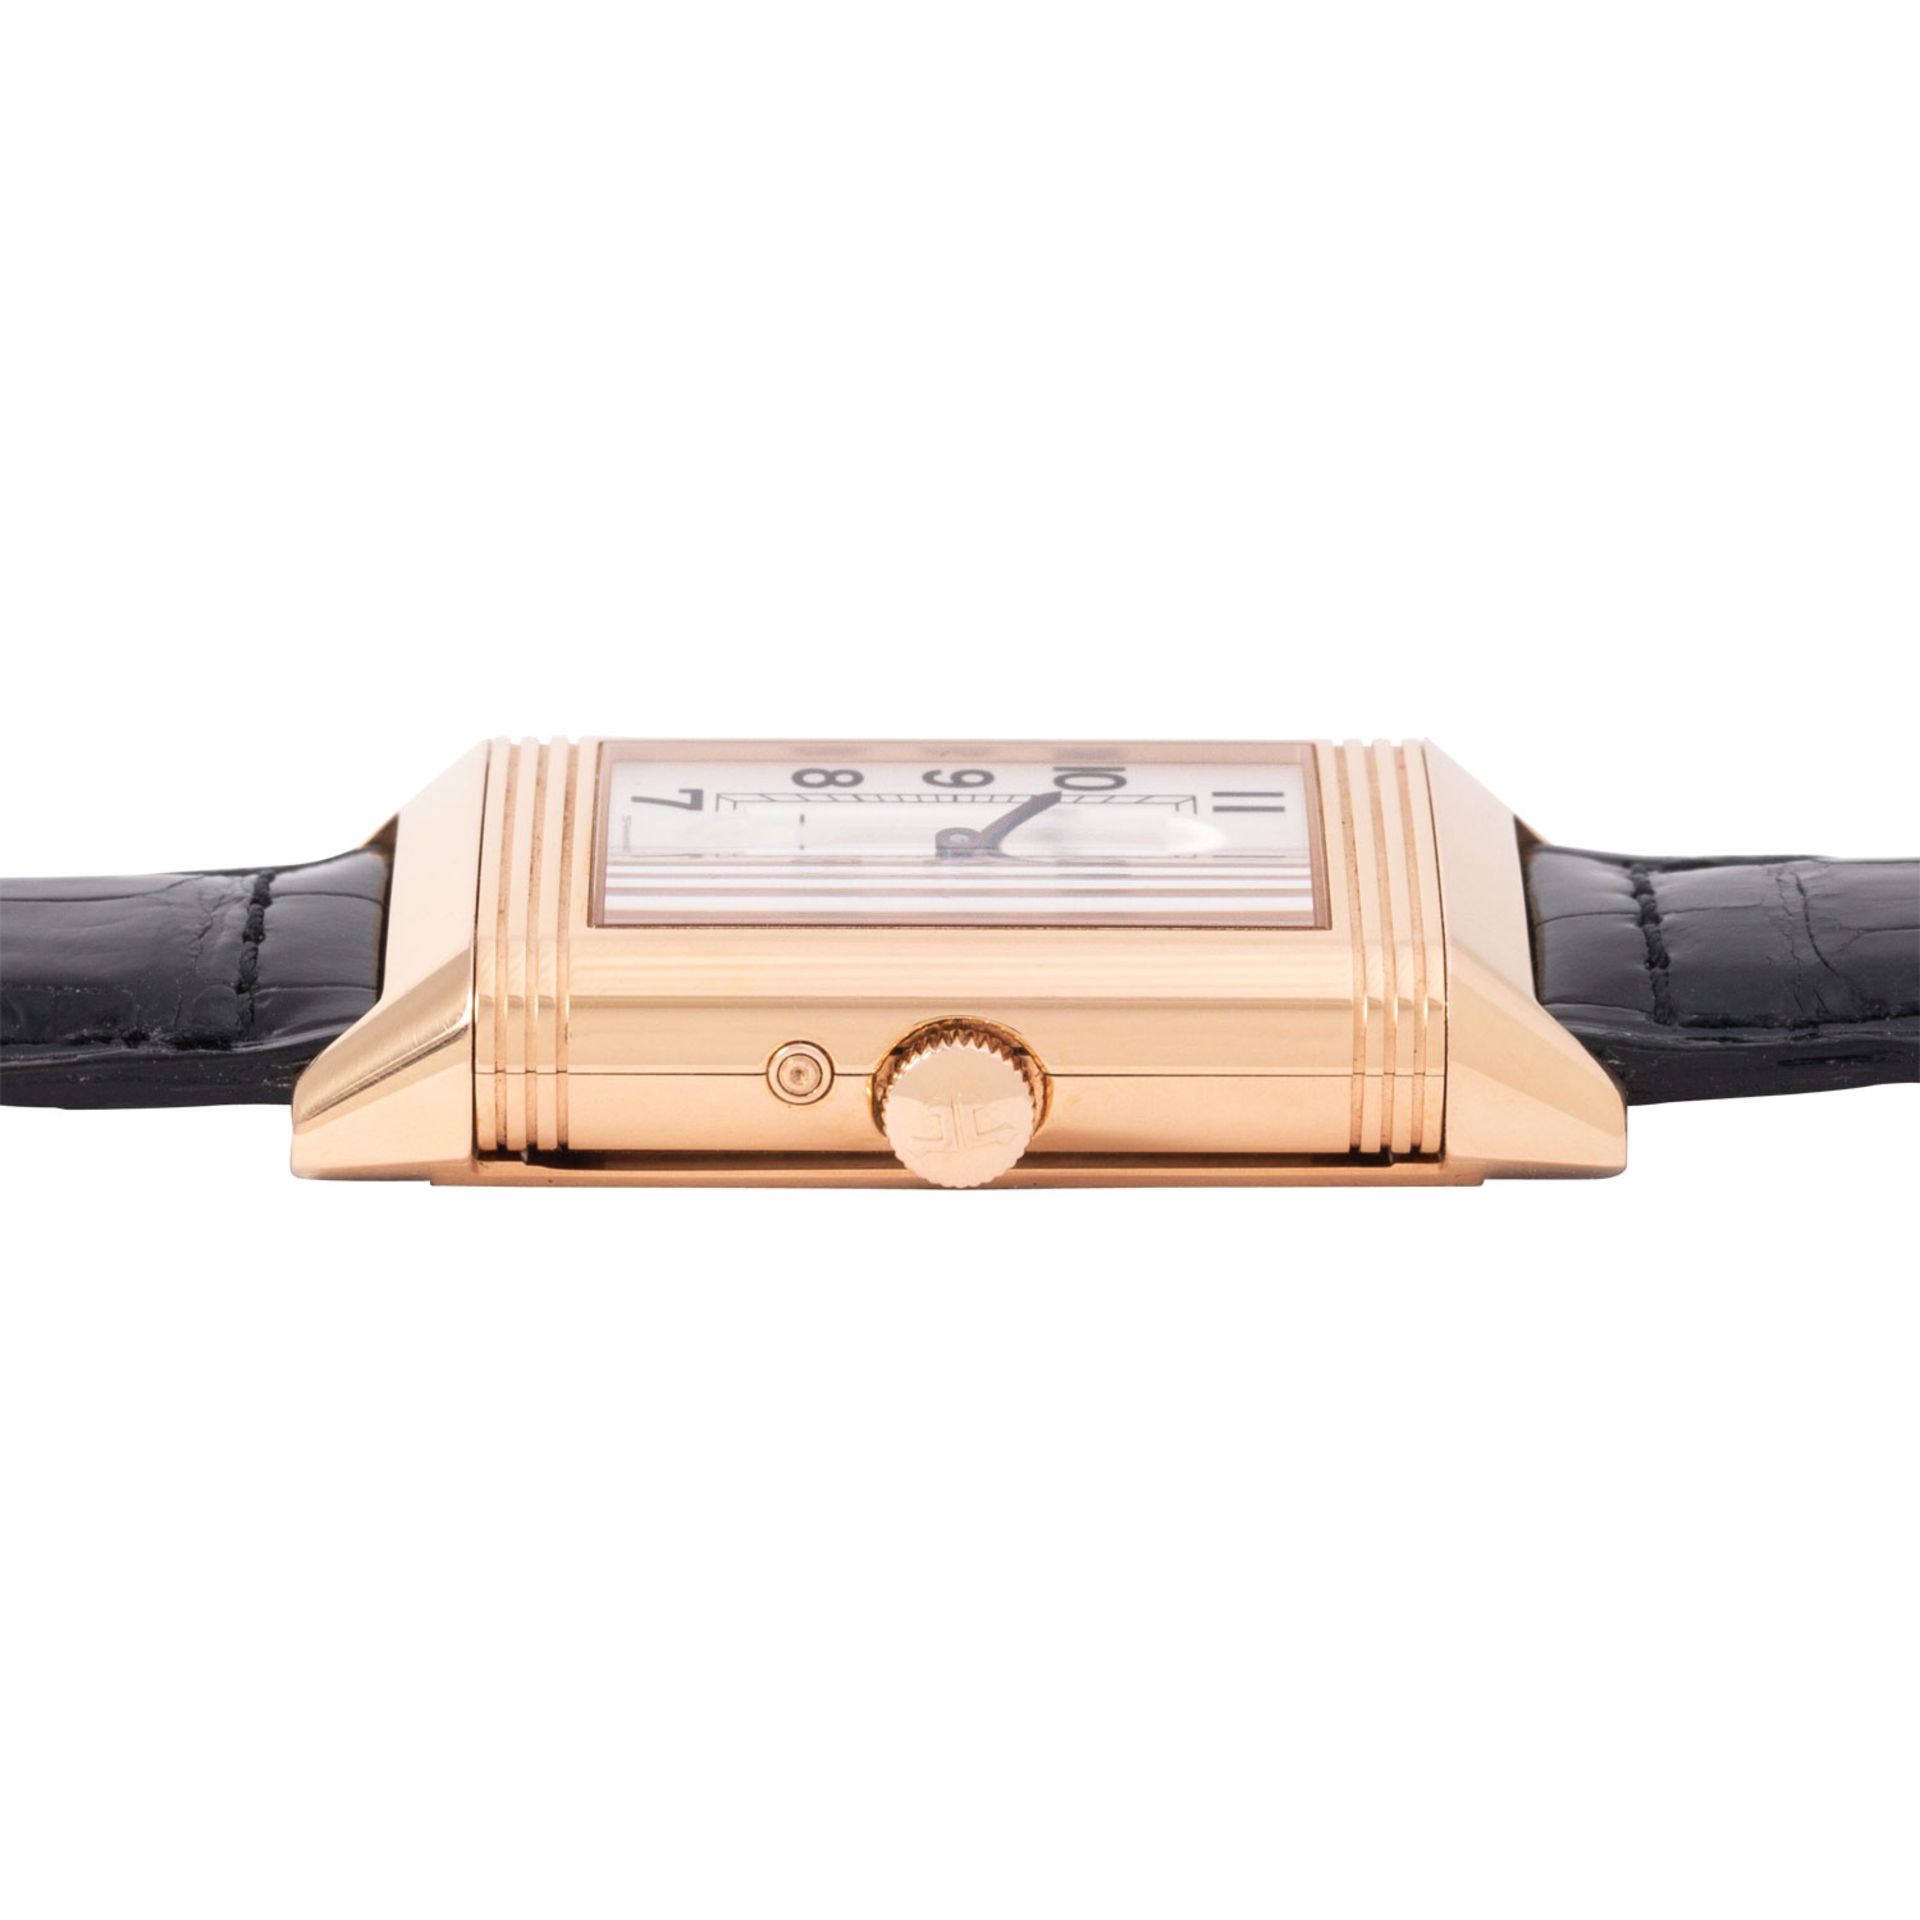 JAEGER-LeCOULTRE limitierte Reverso Night & Day "125 Jahre Wempe", Ref. 270.2.44. Full Set 2003. - Image 3 of 9